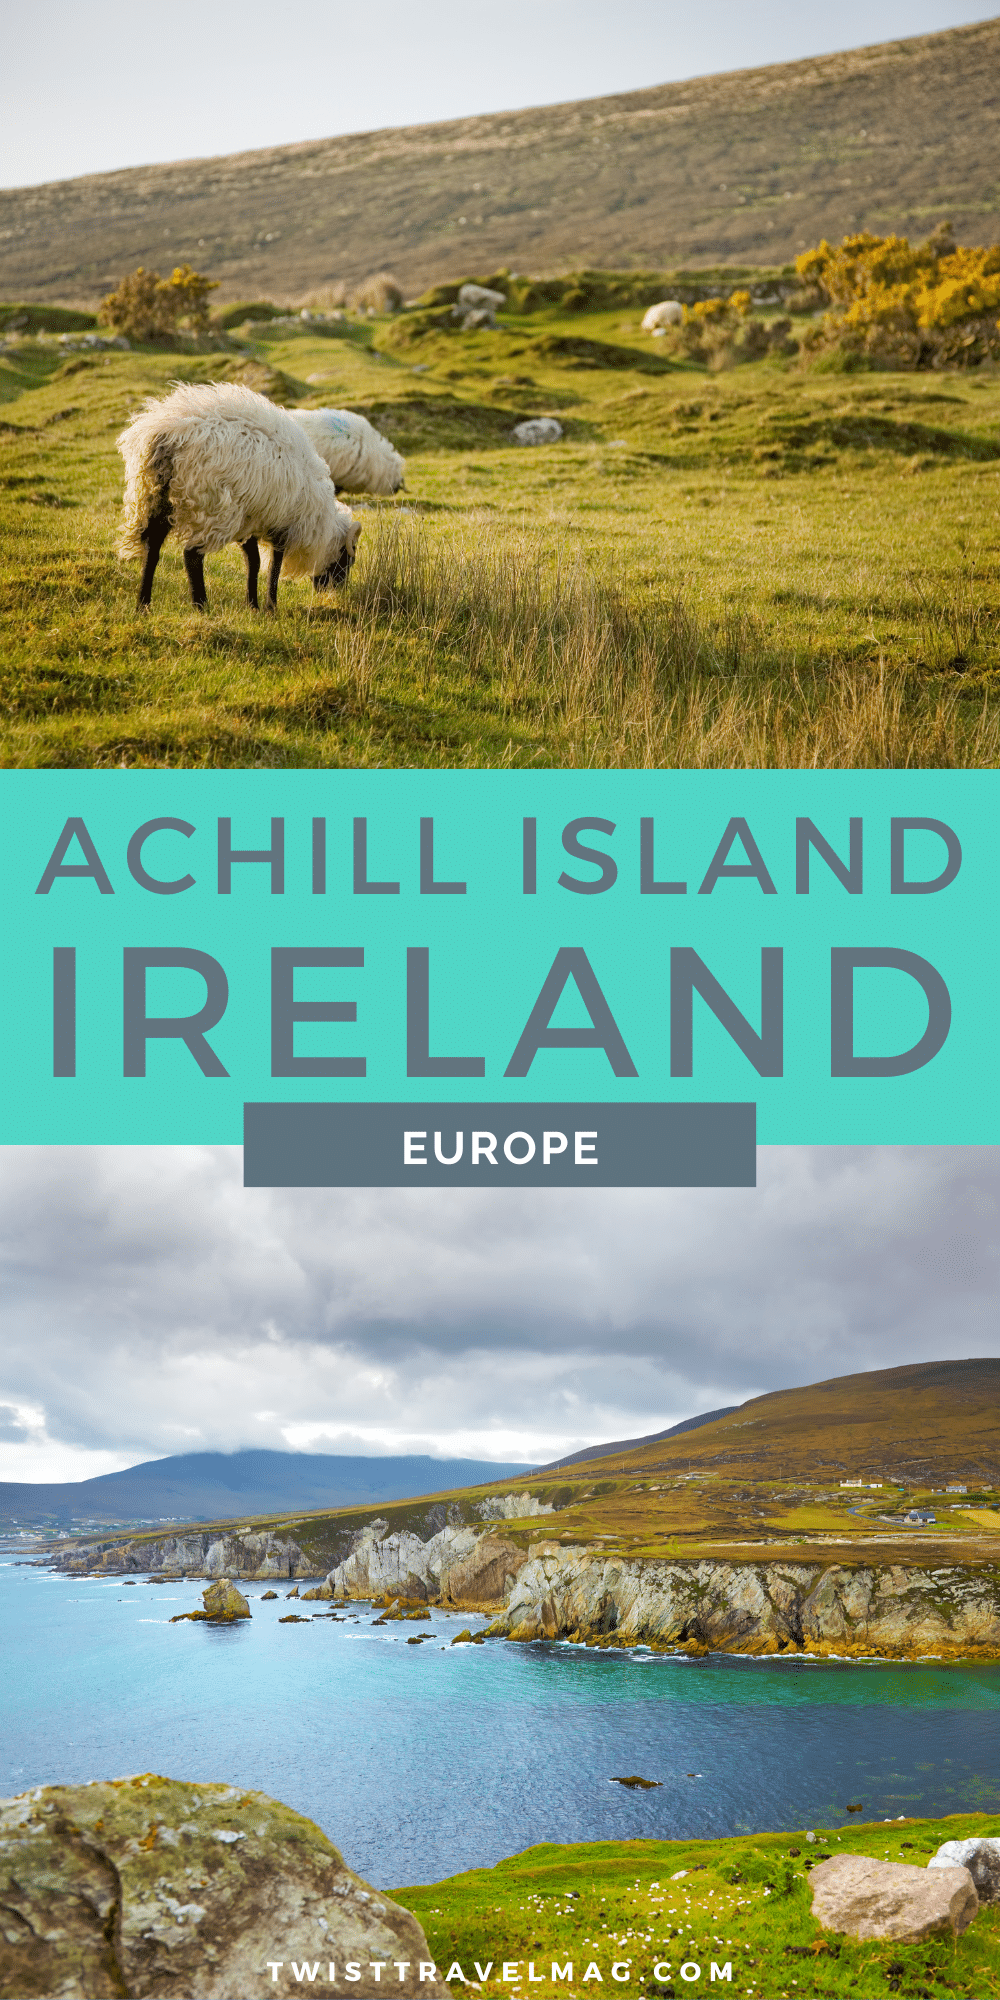 Things to do in Achill Island Ireland